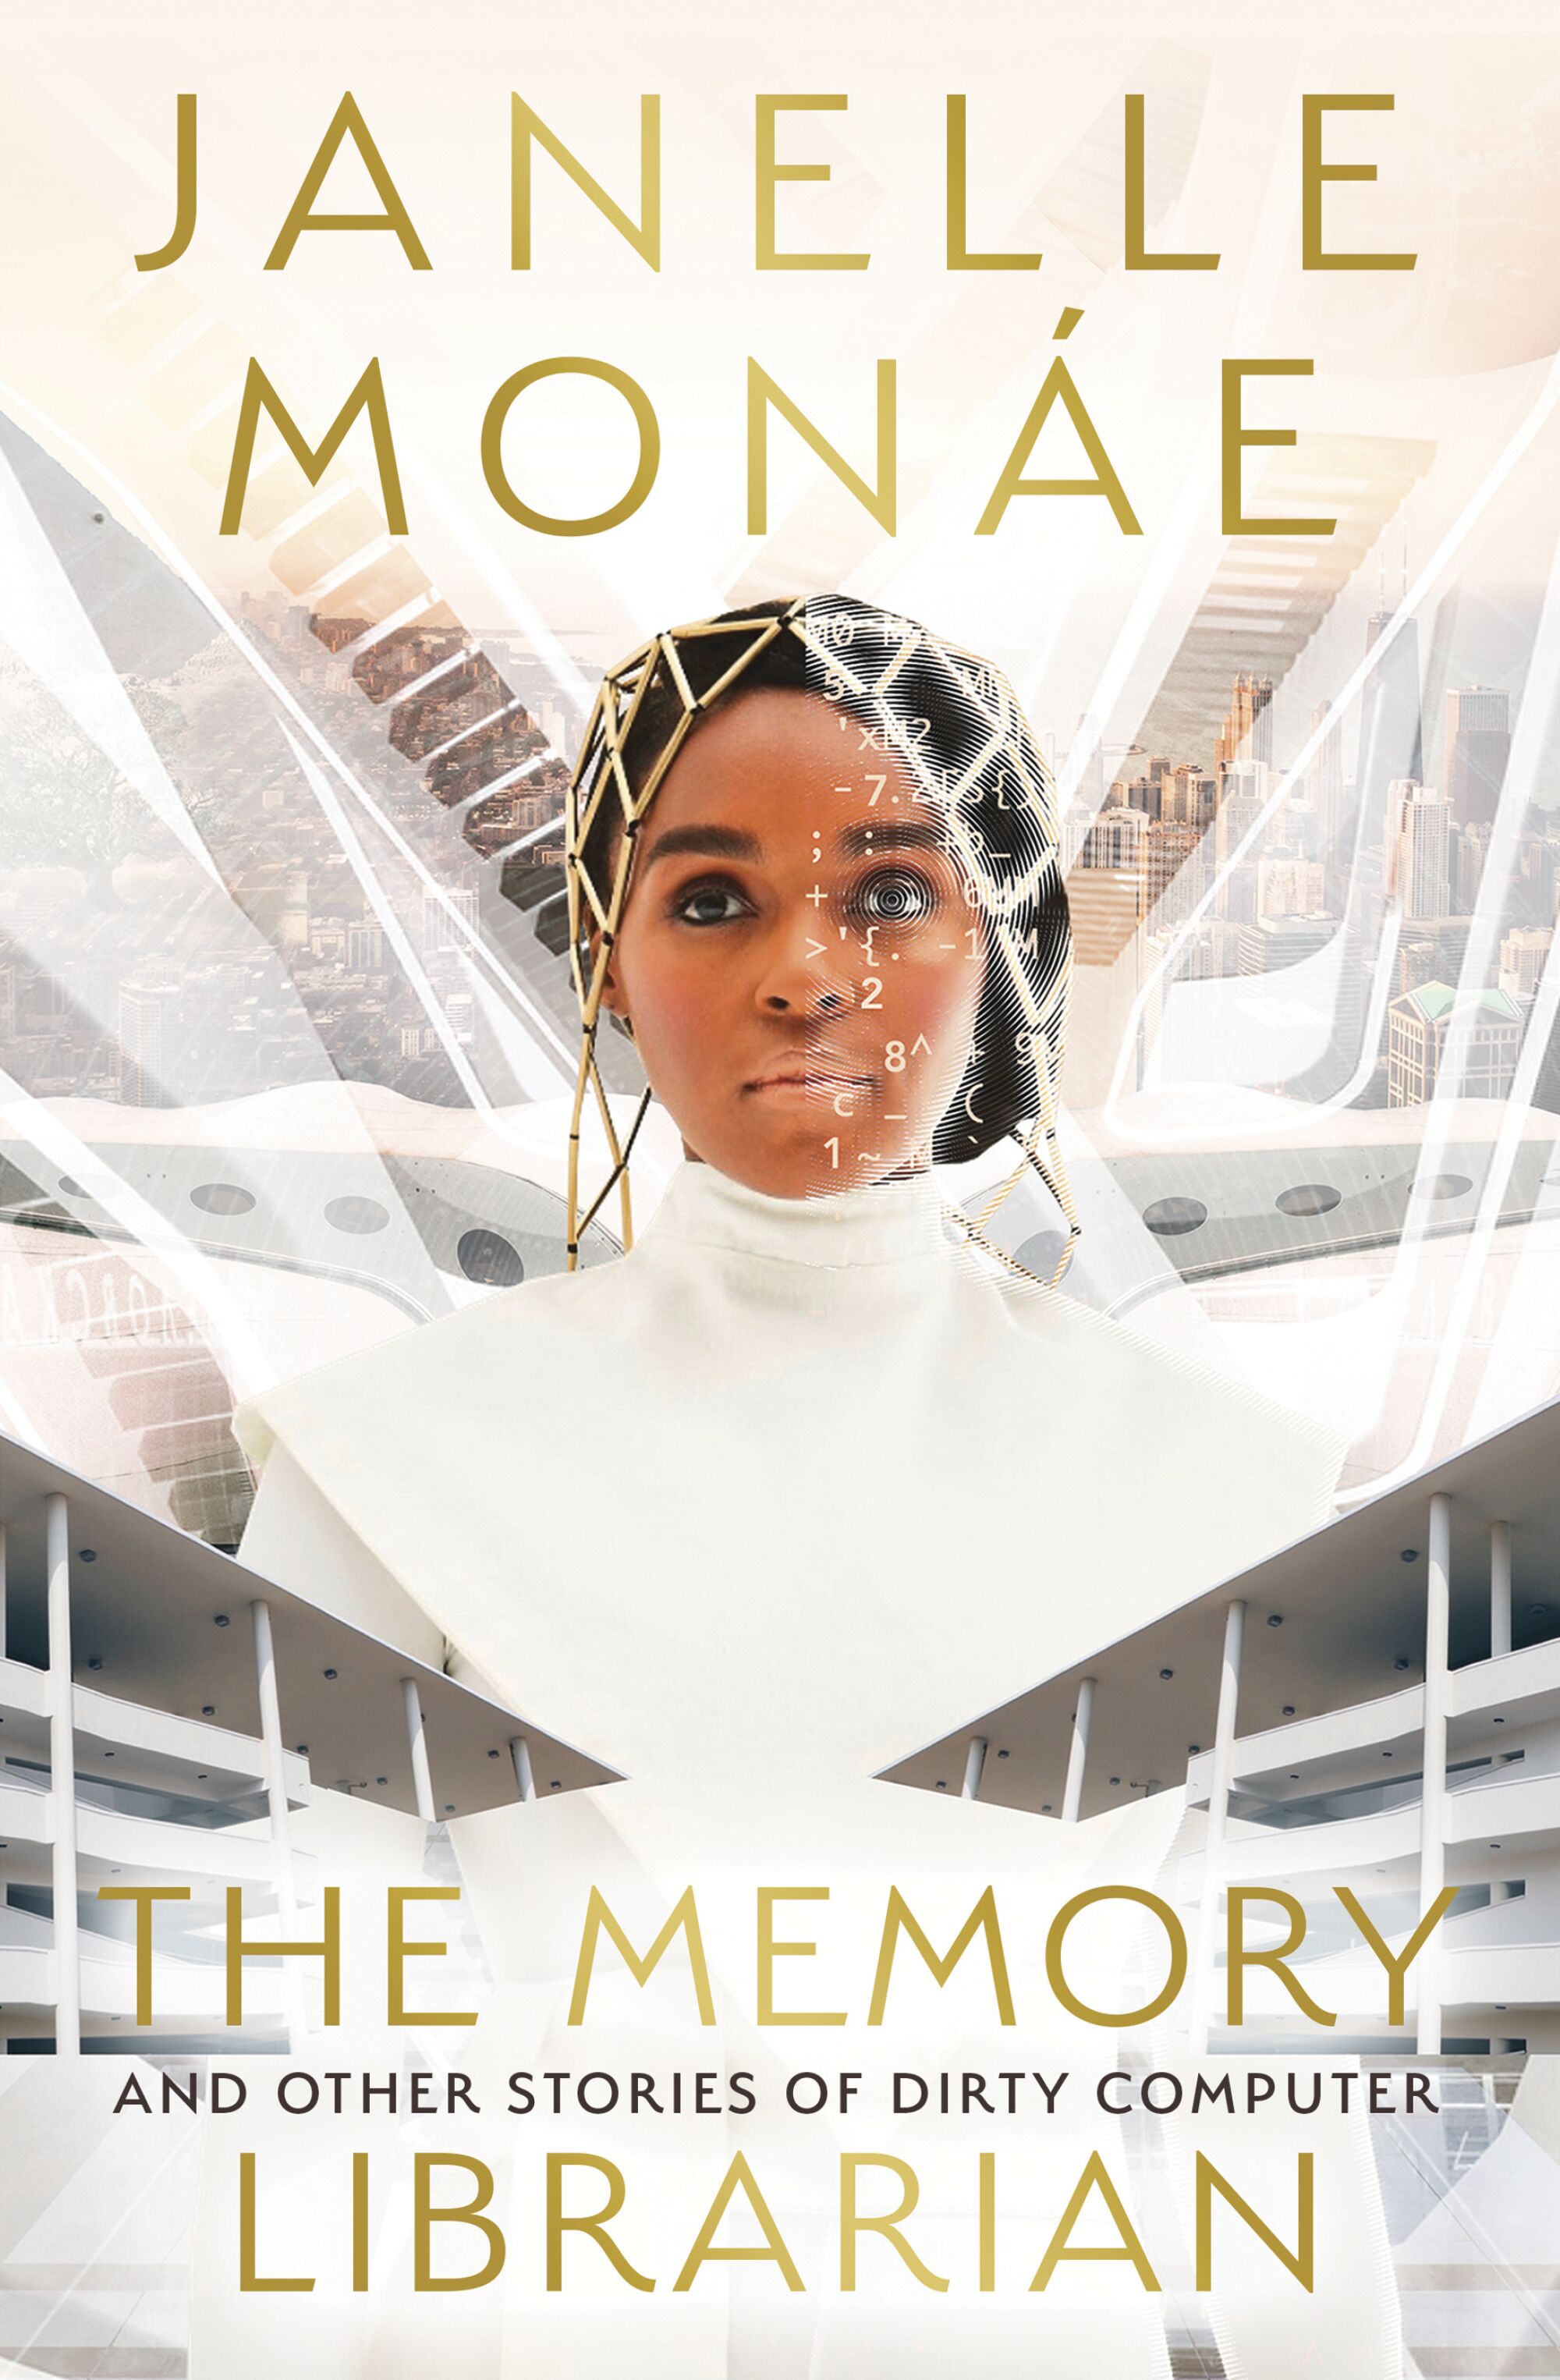 a woman in a futuristic outfit on cover of "The Memory Librarian and Other Stories of Dirty Computer" by Janelle Monae.